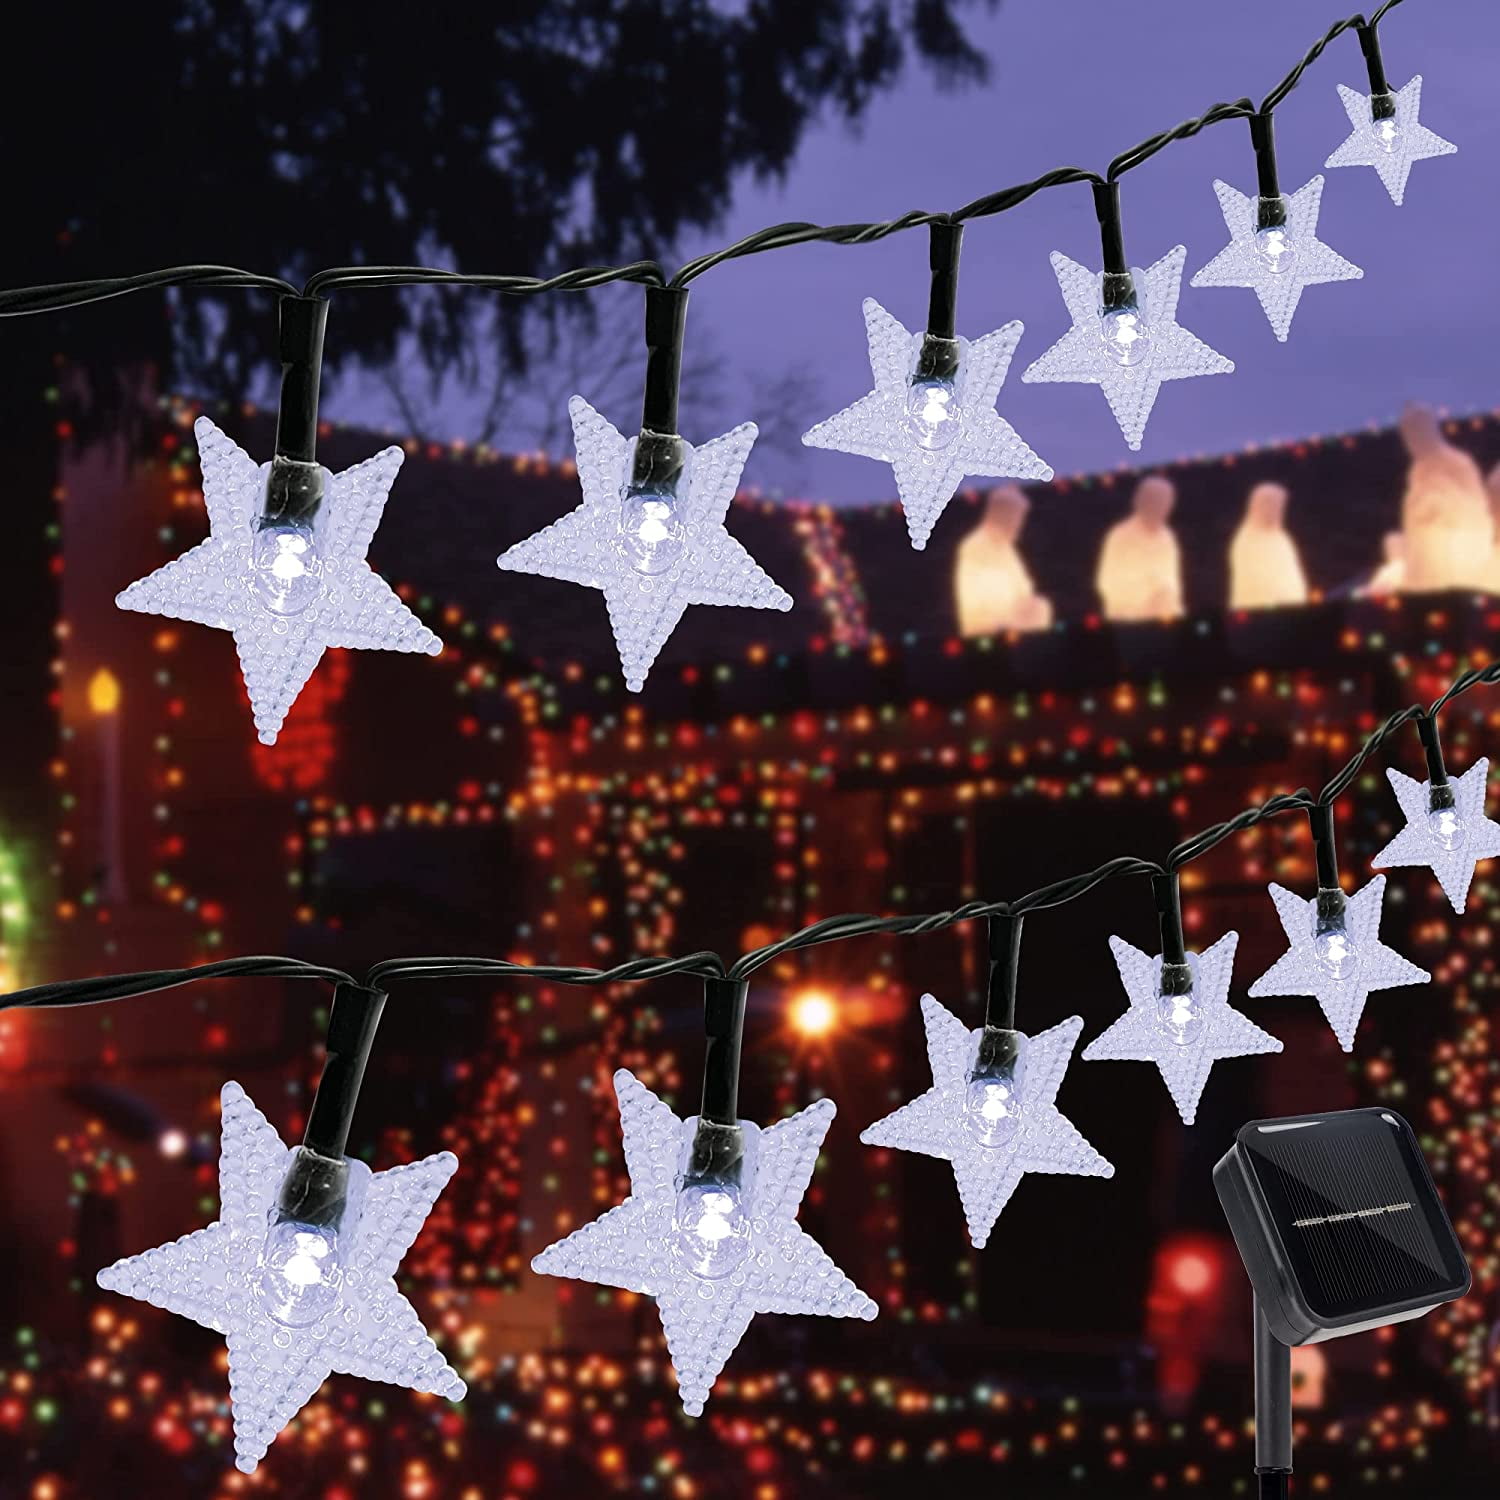 Solar Star Lights, 100 LED 33 FT Outdoor Christmas Fairy Lights, 8 Lighting & Waterproof for Holiday New Year Wedding Party, Xmas Tree, Garden Decor, Cool White - Walmart.com